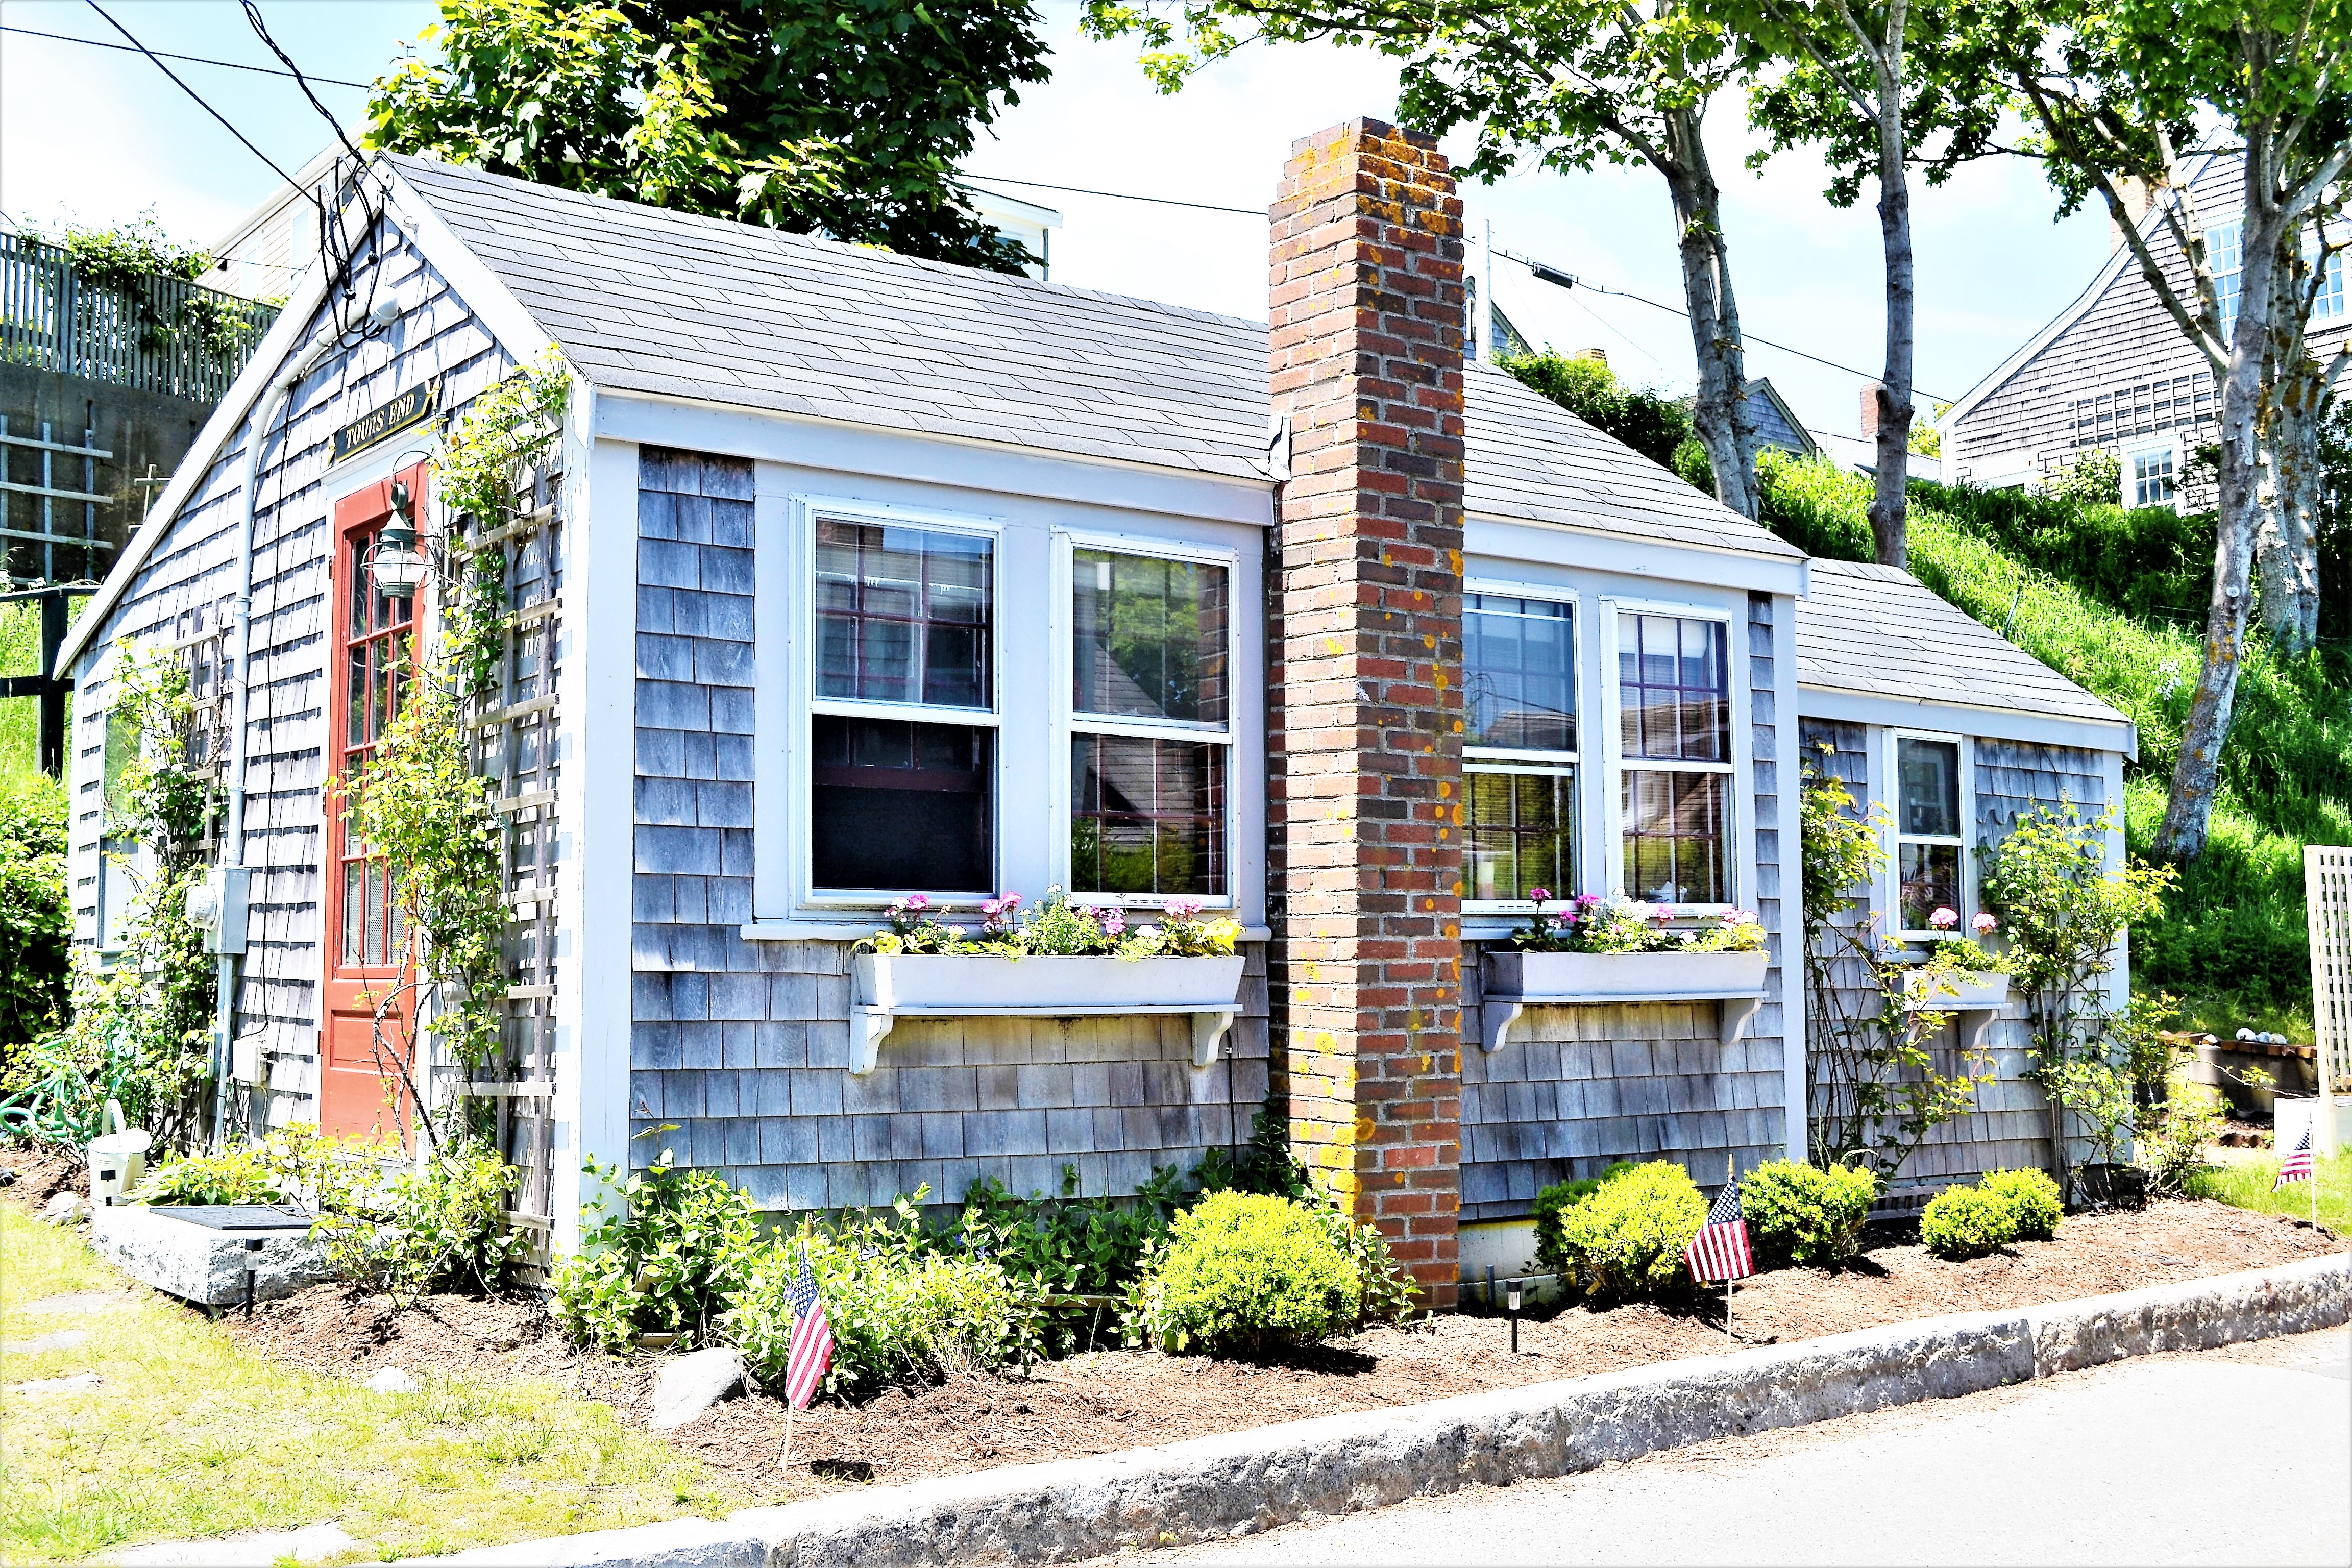 Fisher has 6 fabulous home listed on the Nantucket real estate market under...